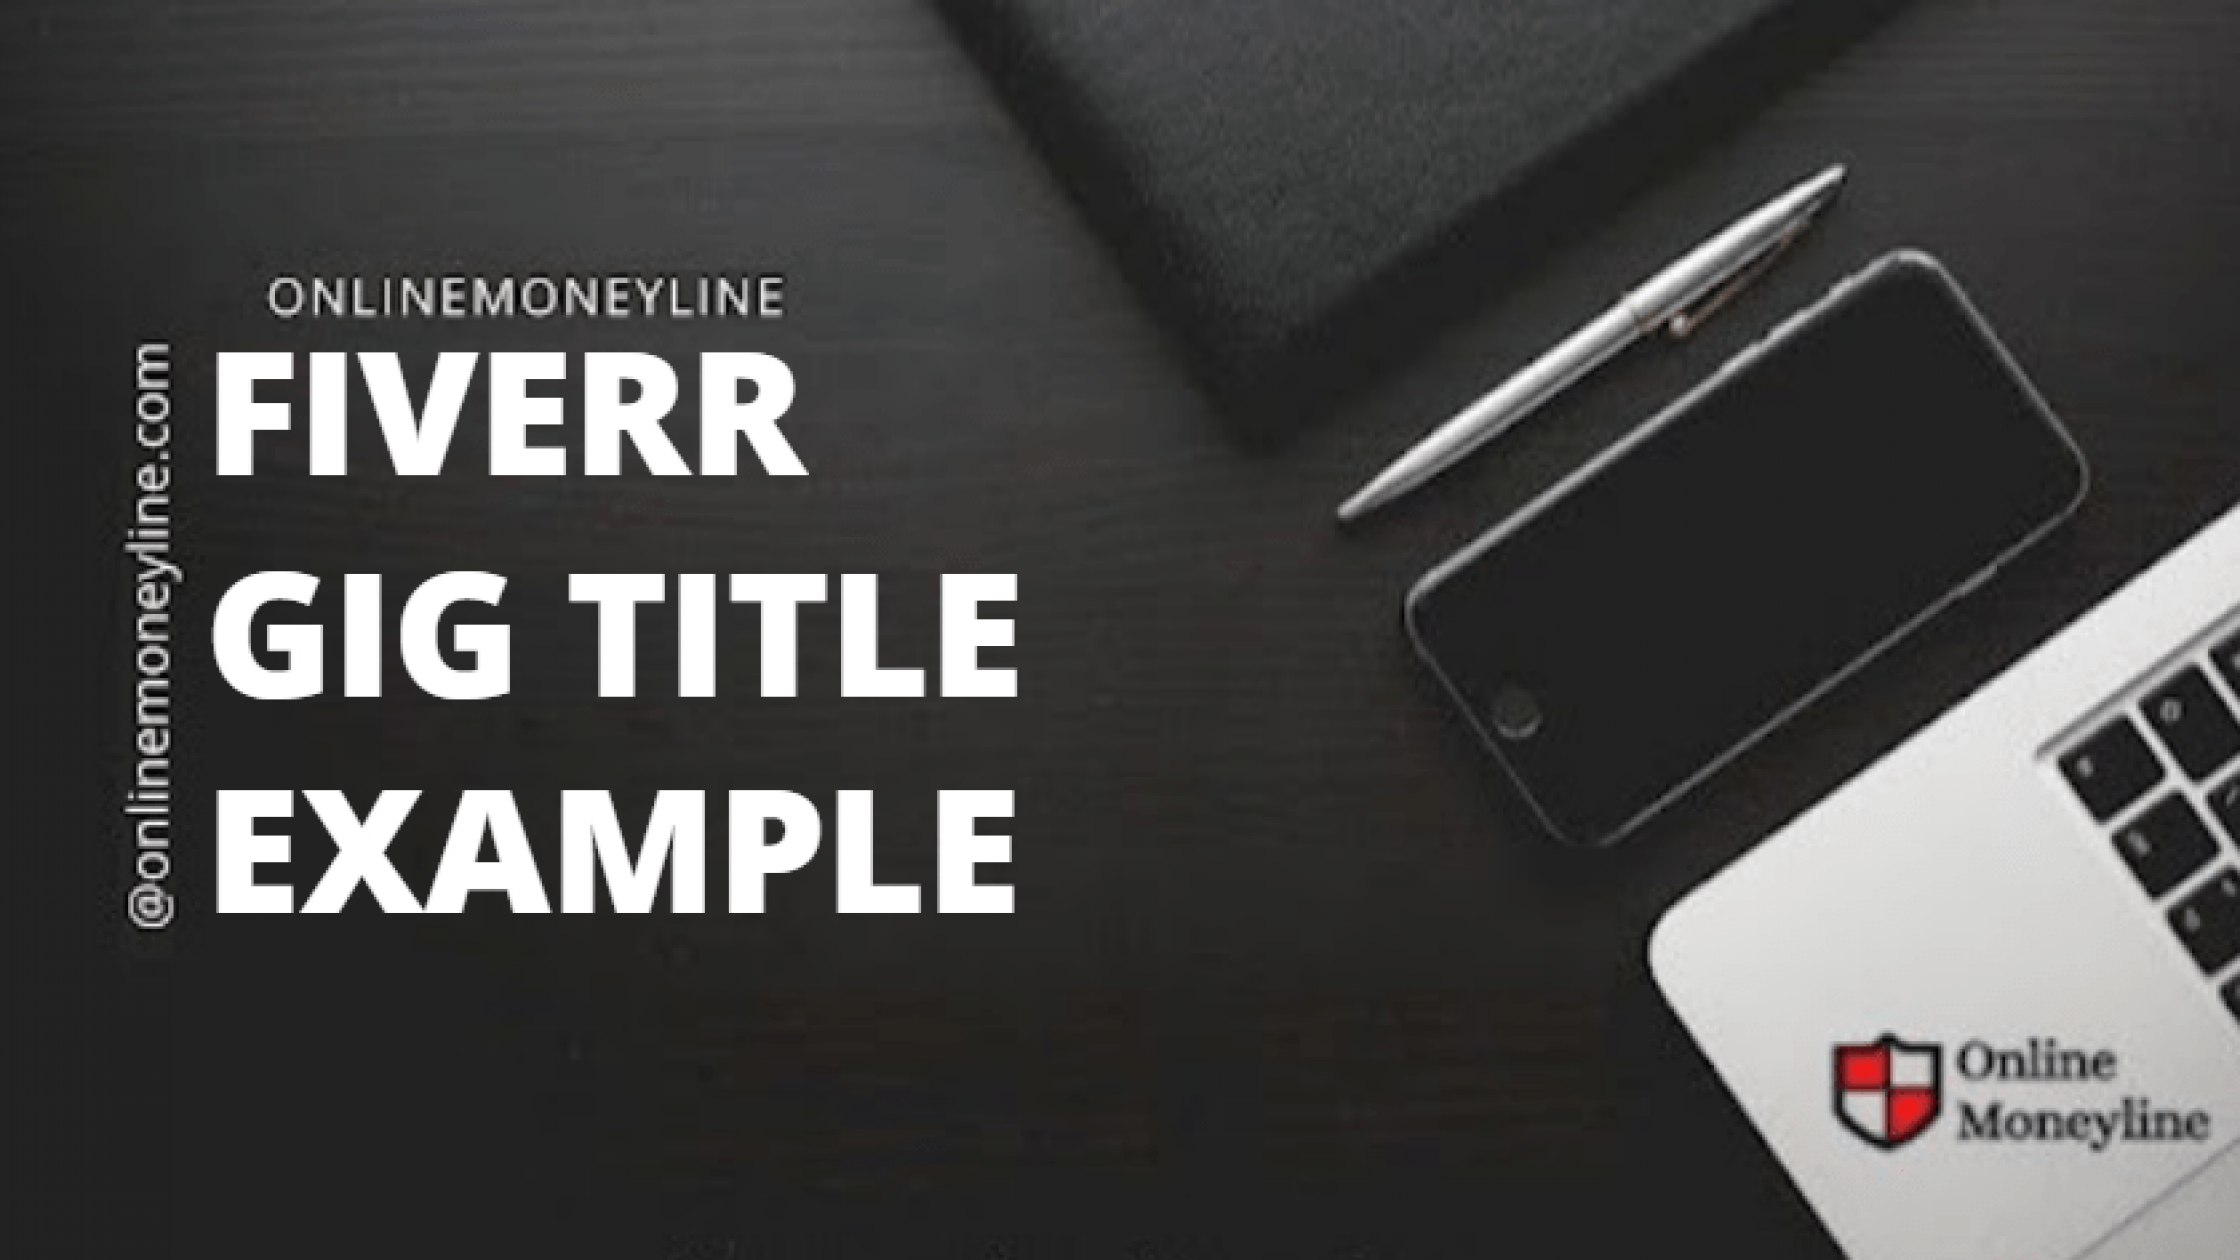 Fiverr Gig Title Example